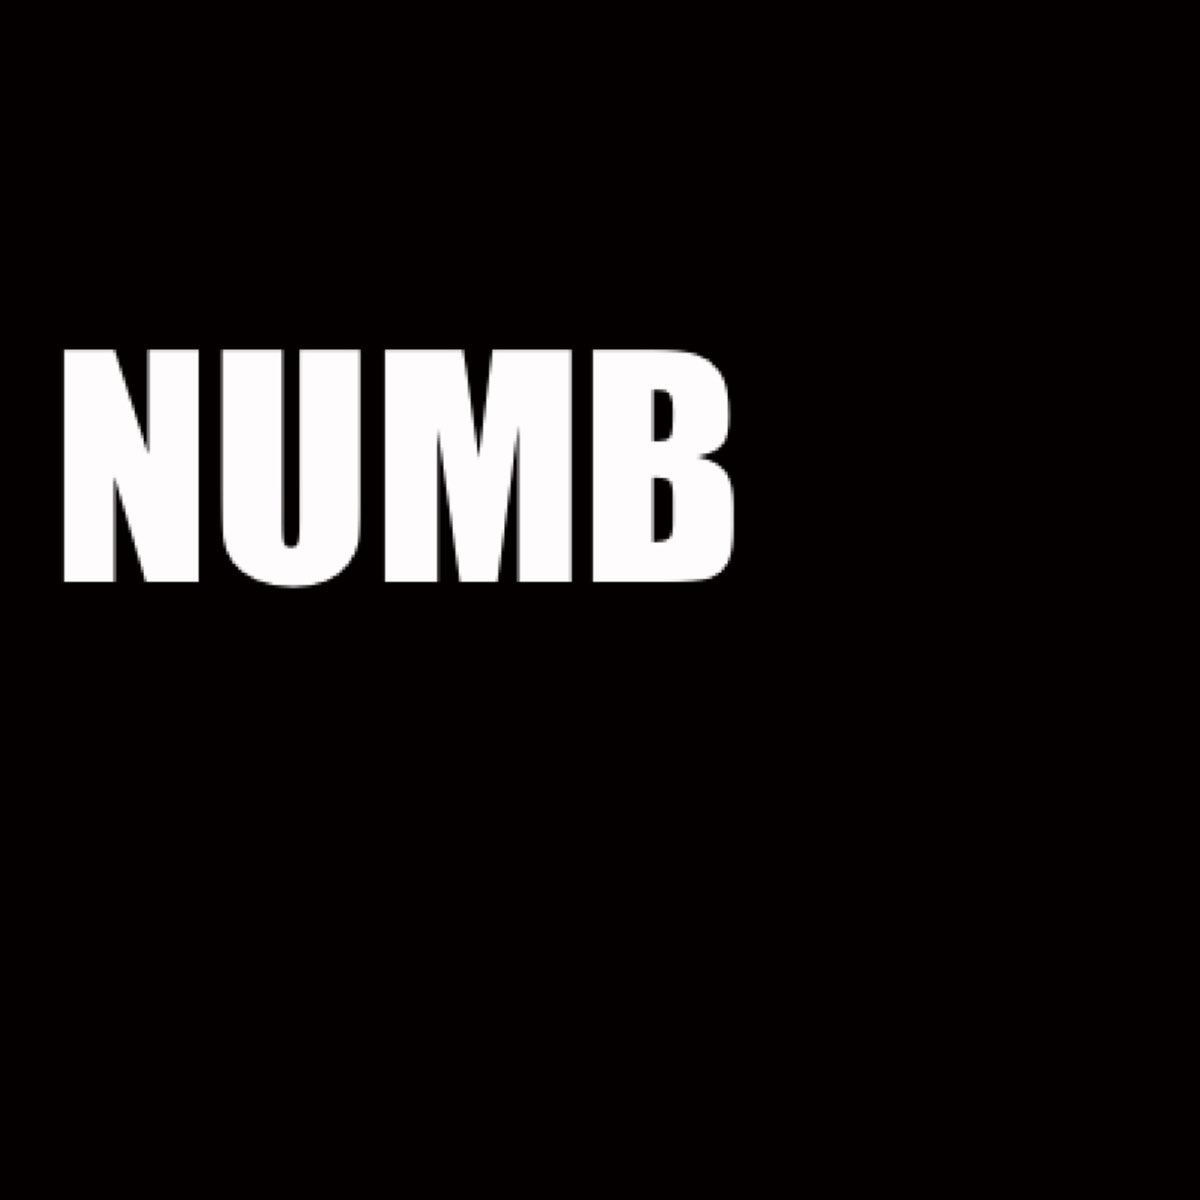 Numb wallpaper by JAYSAVAGE23  Download on ZEDGE  0dd4